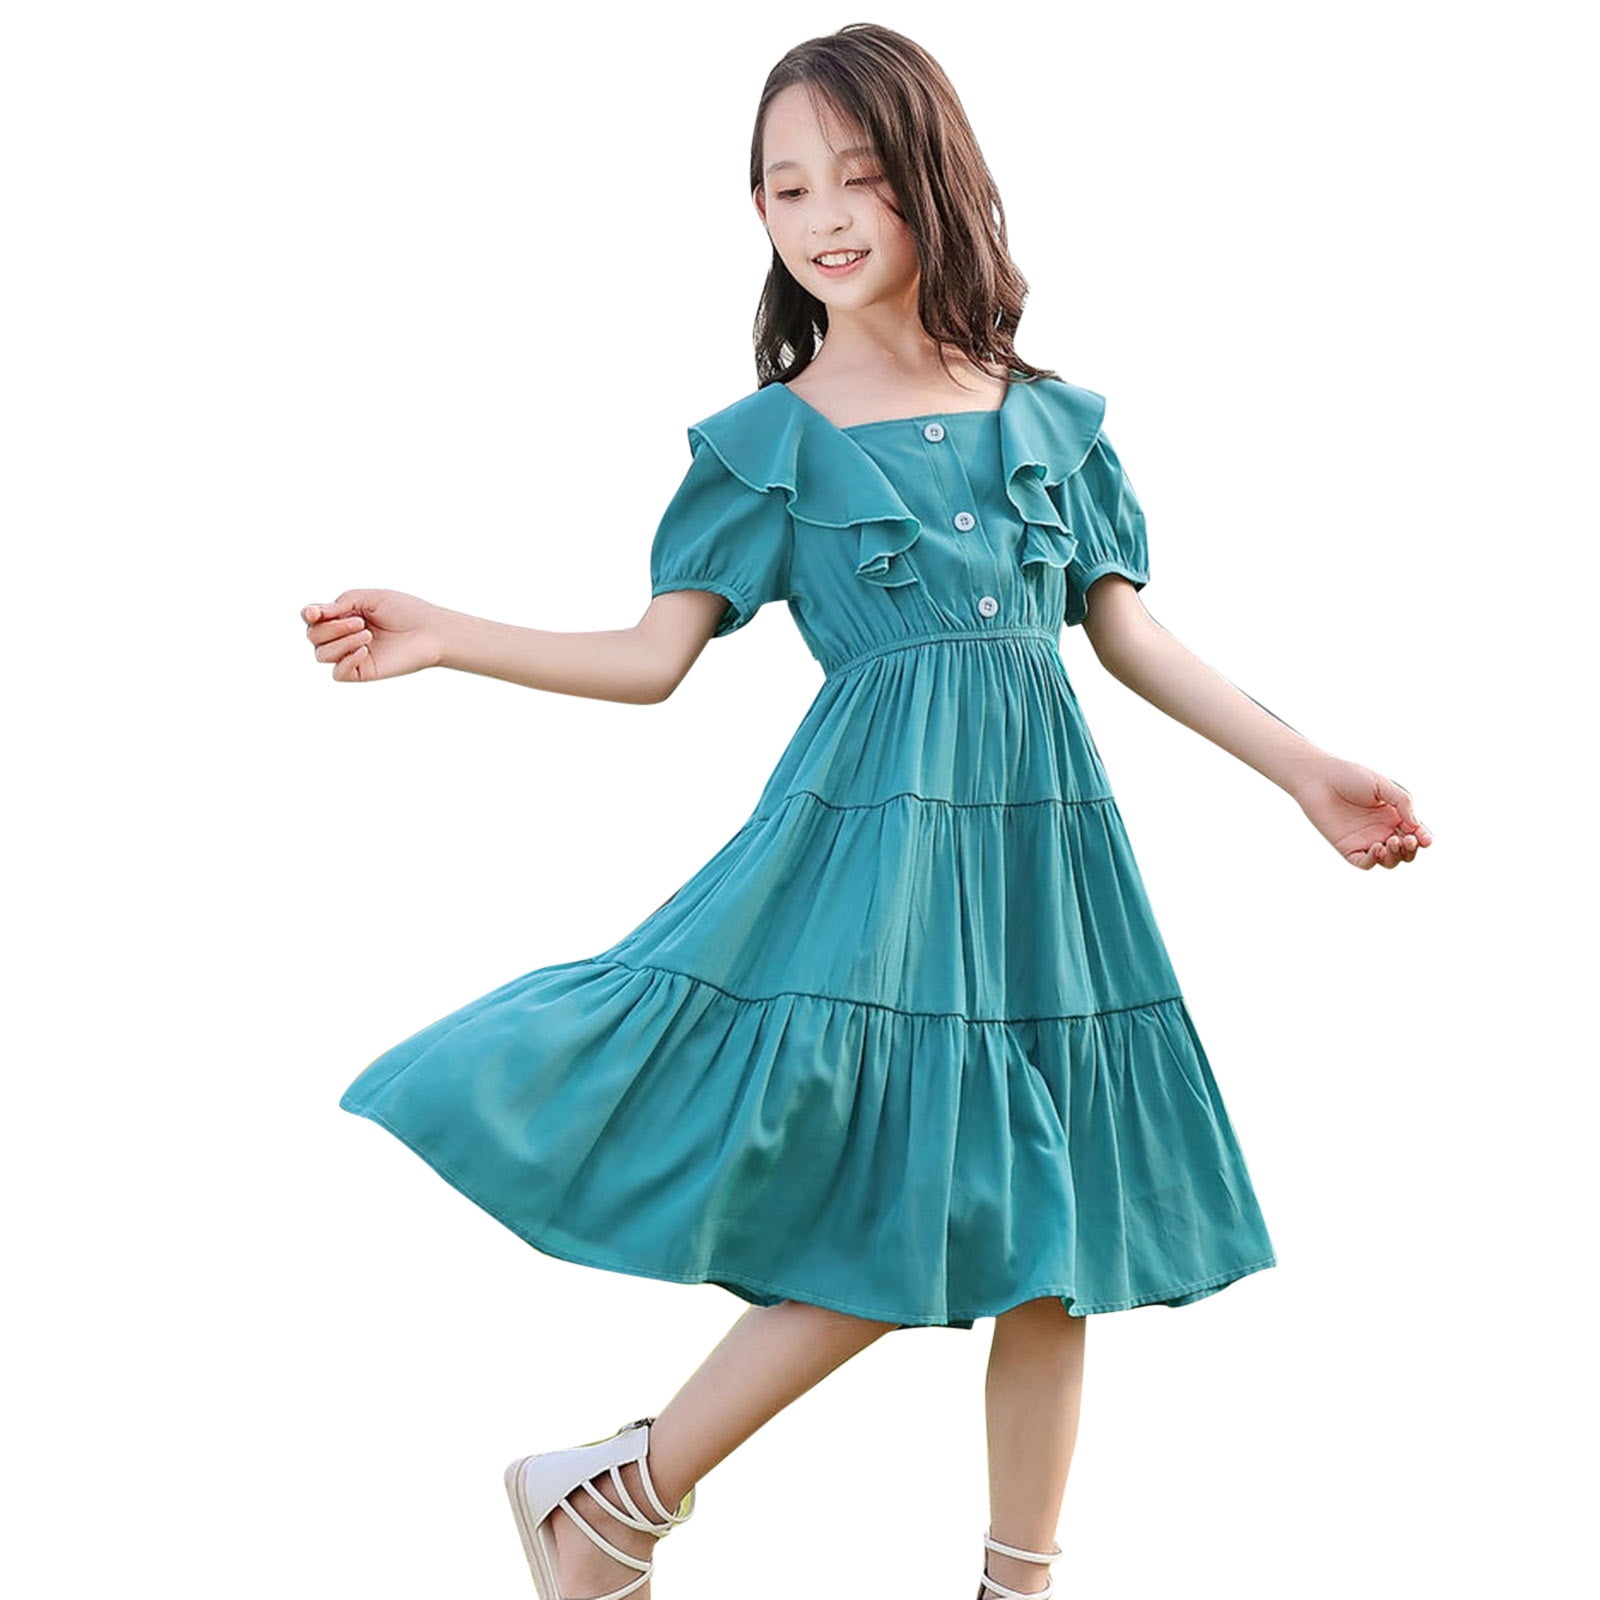 Girls Winter Dress Full Sleeve Cotton Casual Girls Autumn Clothes Lace  Voile Flower Party Frocks Dress Girls Christmas Dress - Girls Casual Dresses  - AliExpress